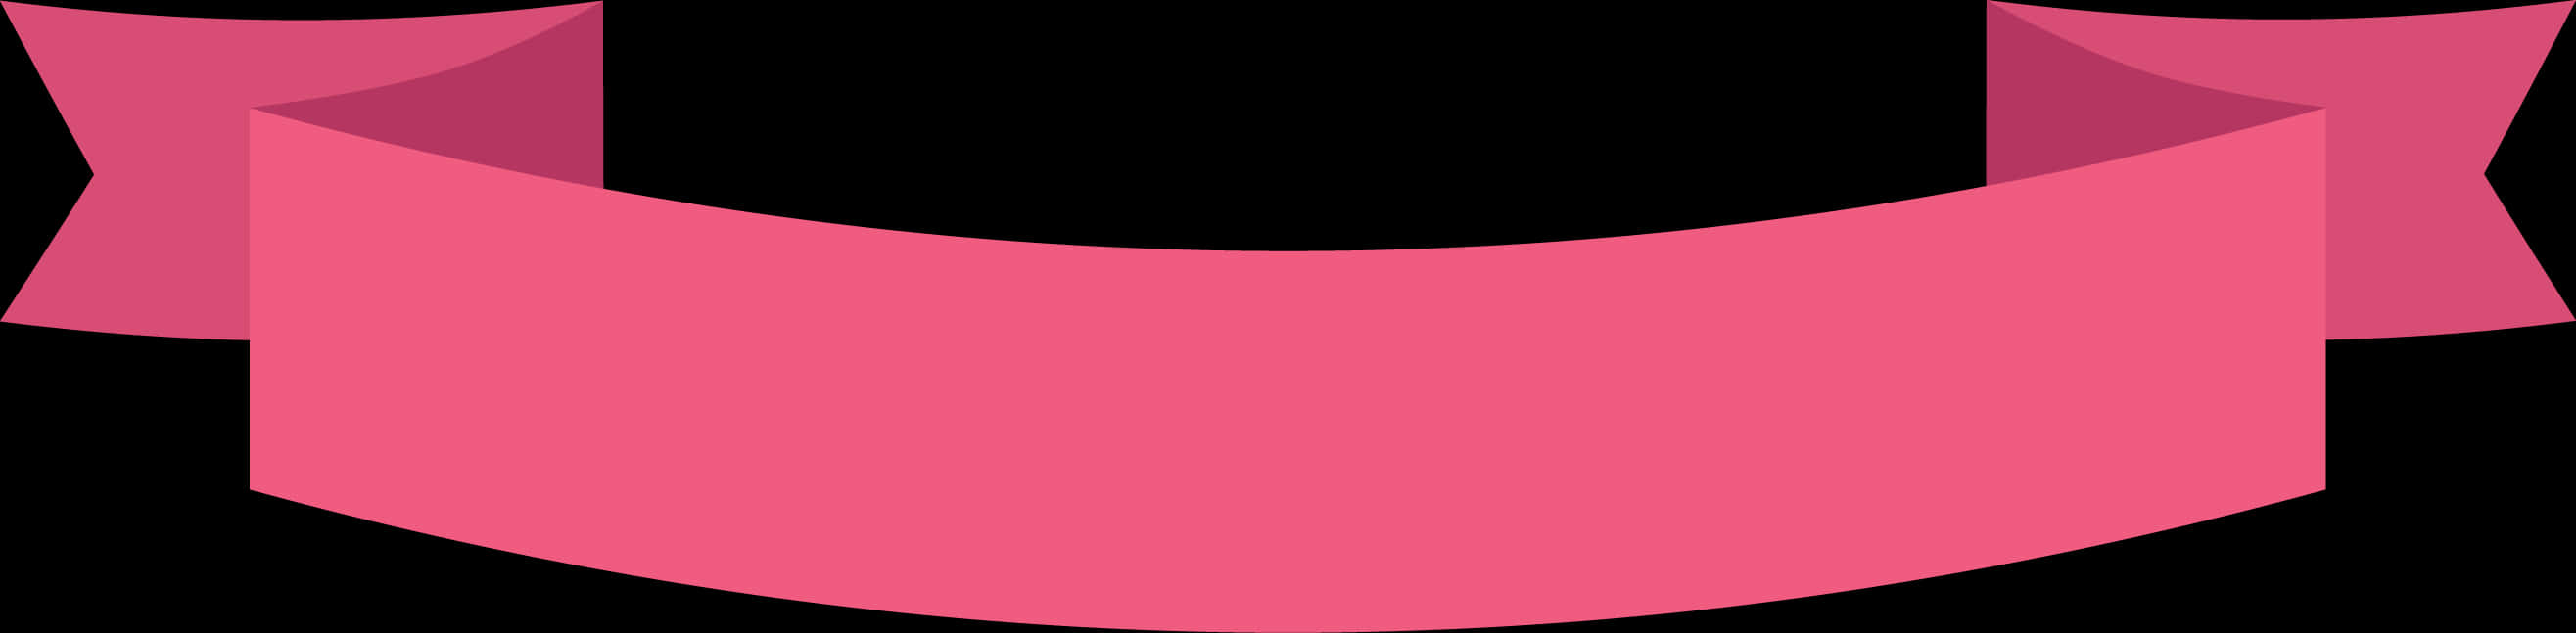 Pink Banner Ribbon Graphic PNG